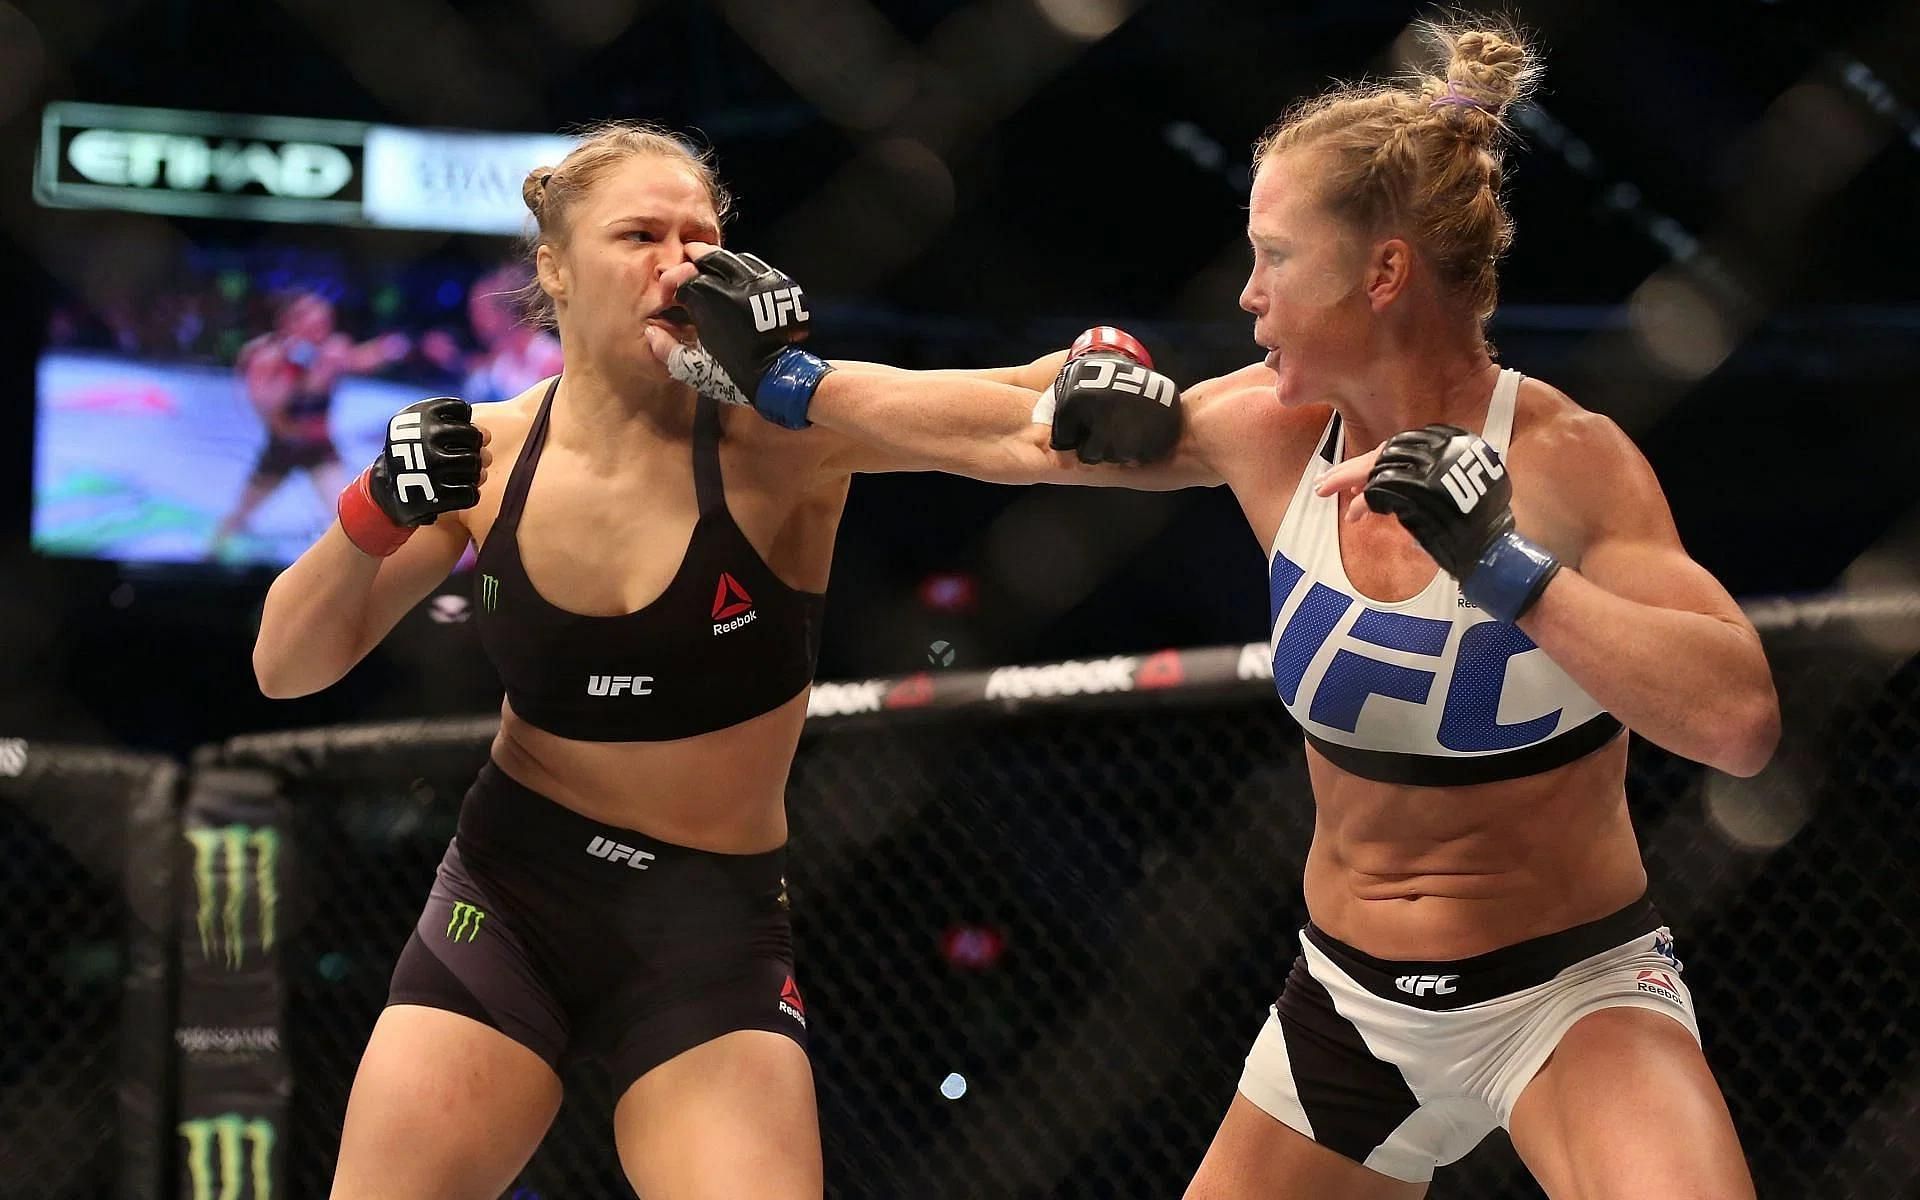 Ronda Rousey and Holly holm fought at UFC 193 [Image via Getty]